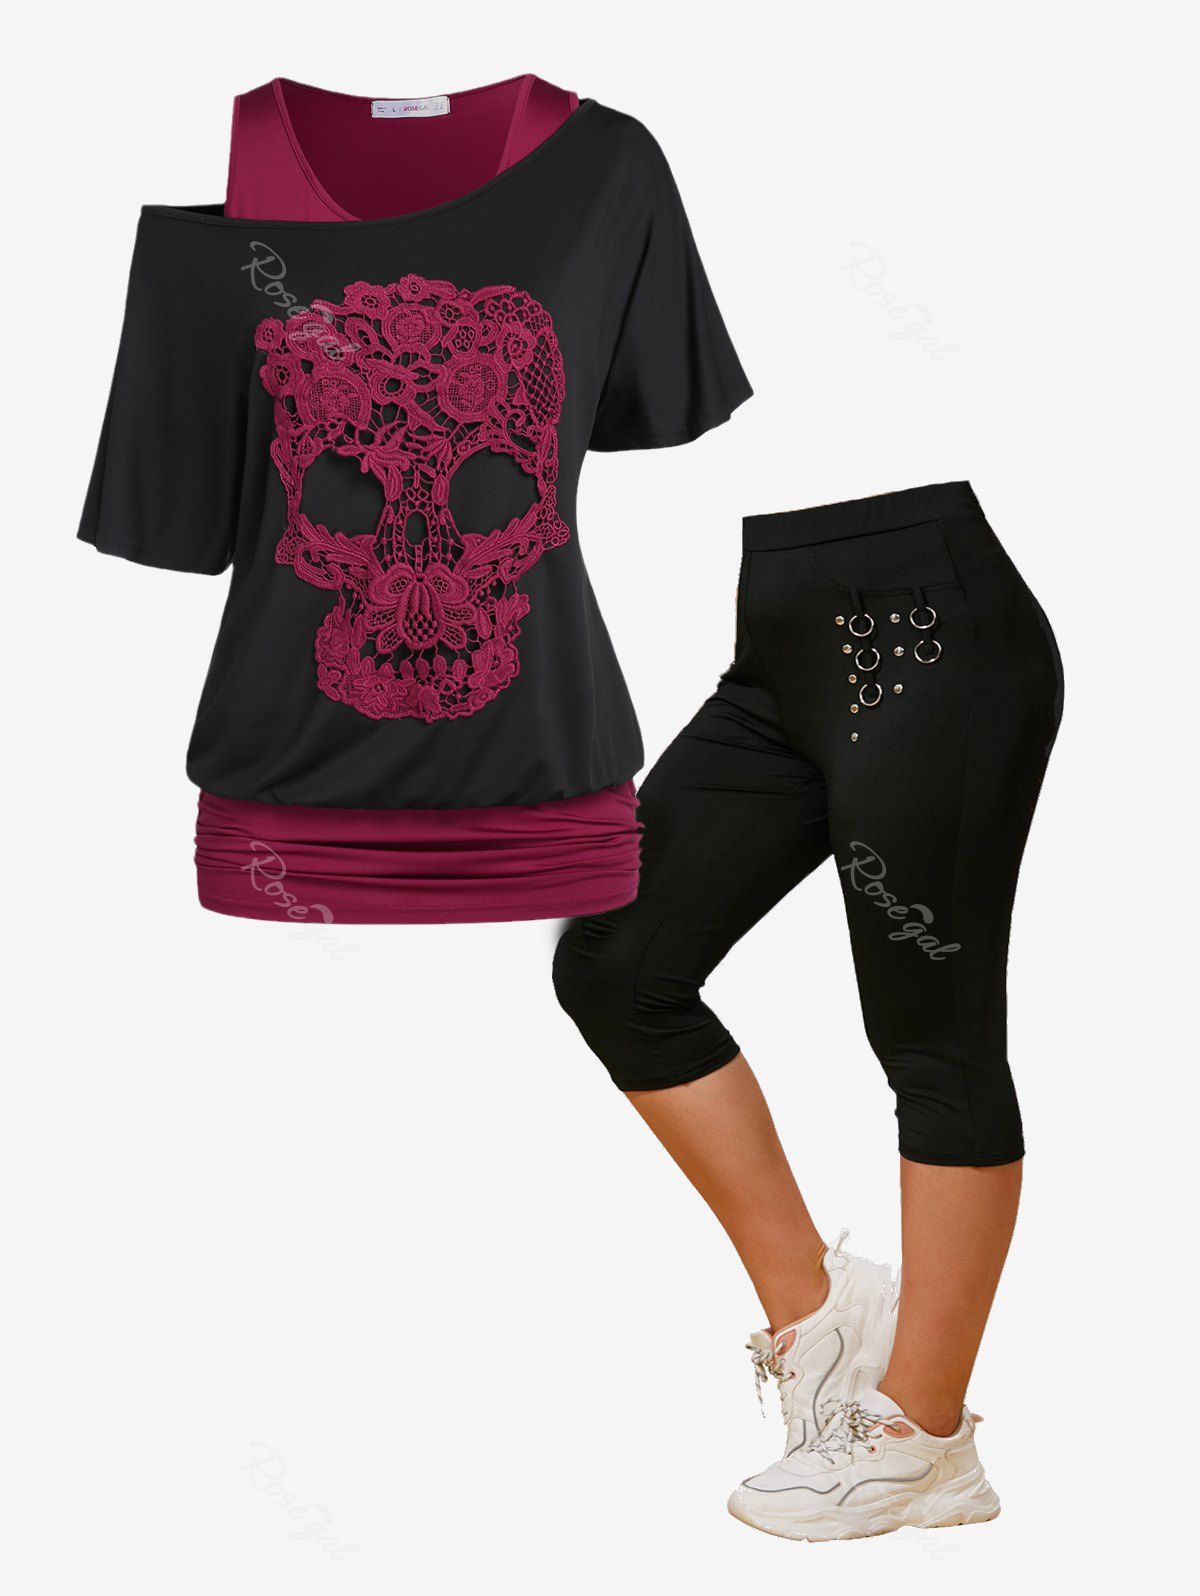 Store Gothic Skew Neck Skull Lace Tee and Ruched Top Set and Studded Capri Leggings Plus Size Summer Outfit  